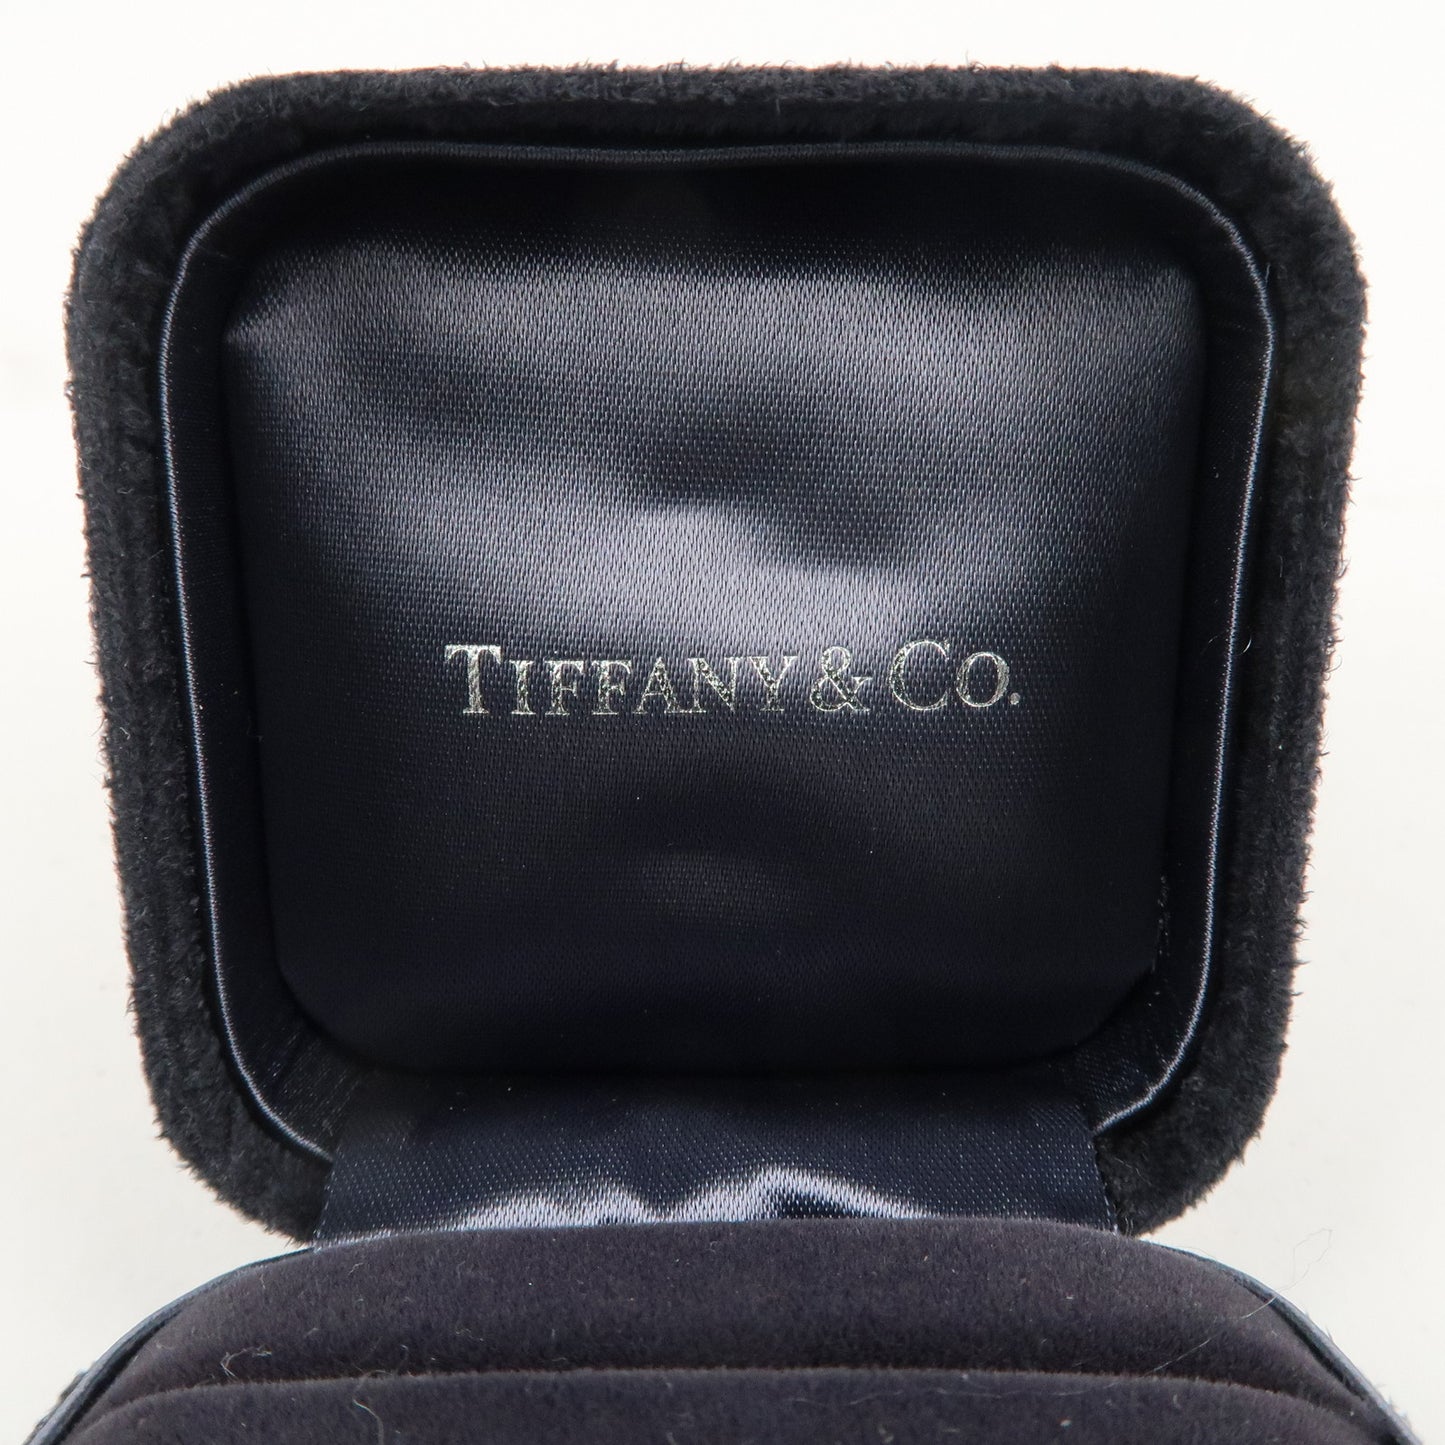 Tiffany&Co. Set of 3 Jewelry Box For Pair Rings Tiffany Blue